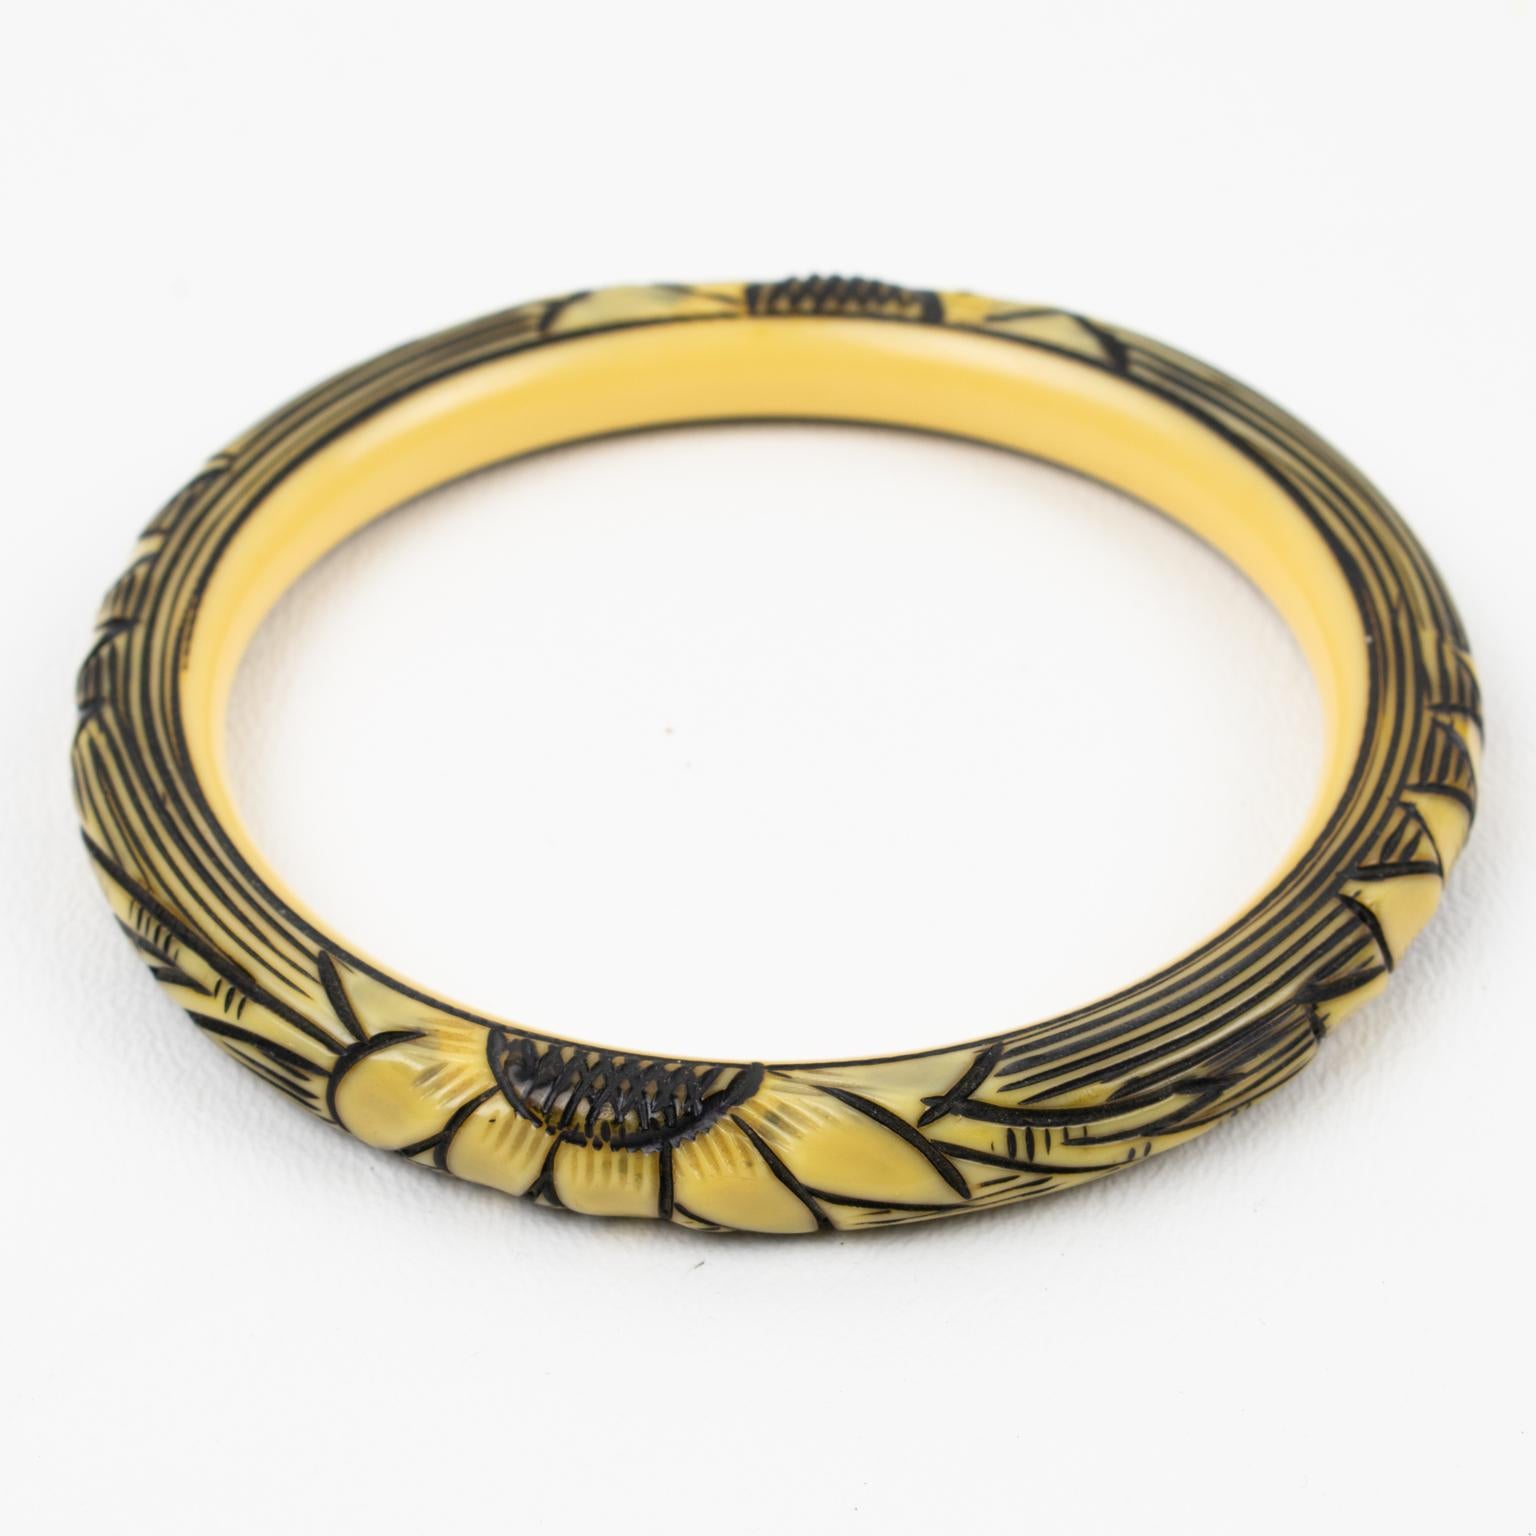 This lovely 1925s Art Deco celluloid bracelet bangle features a floral design with four motifs all around the bracelet. The design is deeply carved, painted, and stained. The bangle boasts assorted colors of off-white, yellow, and